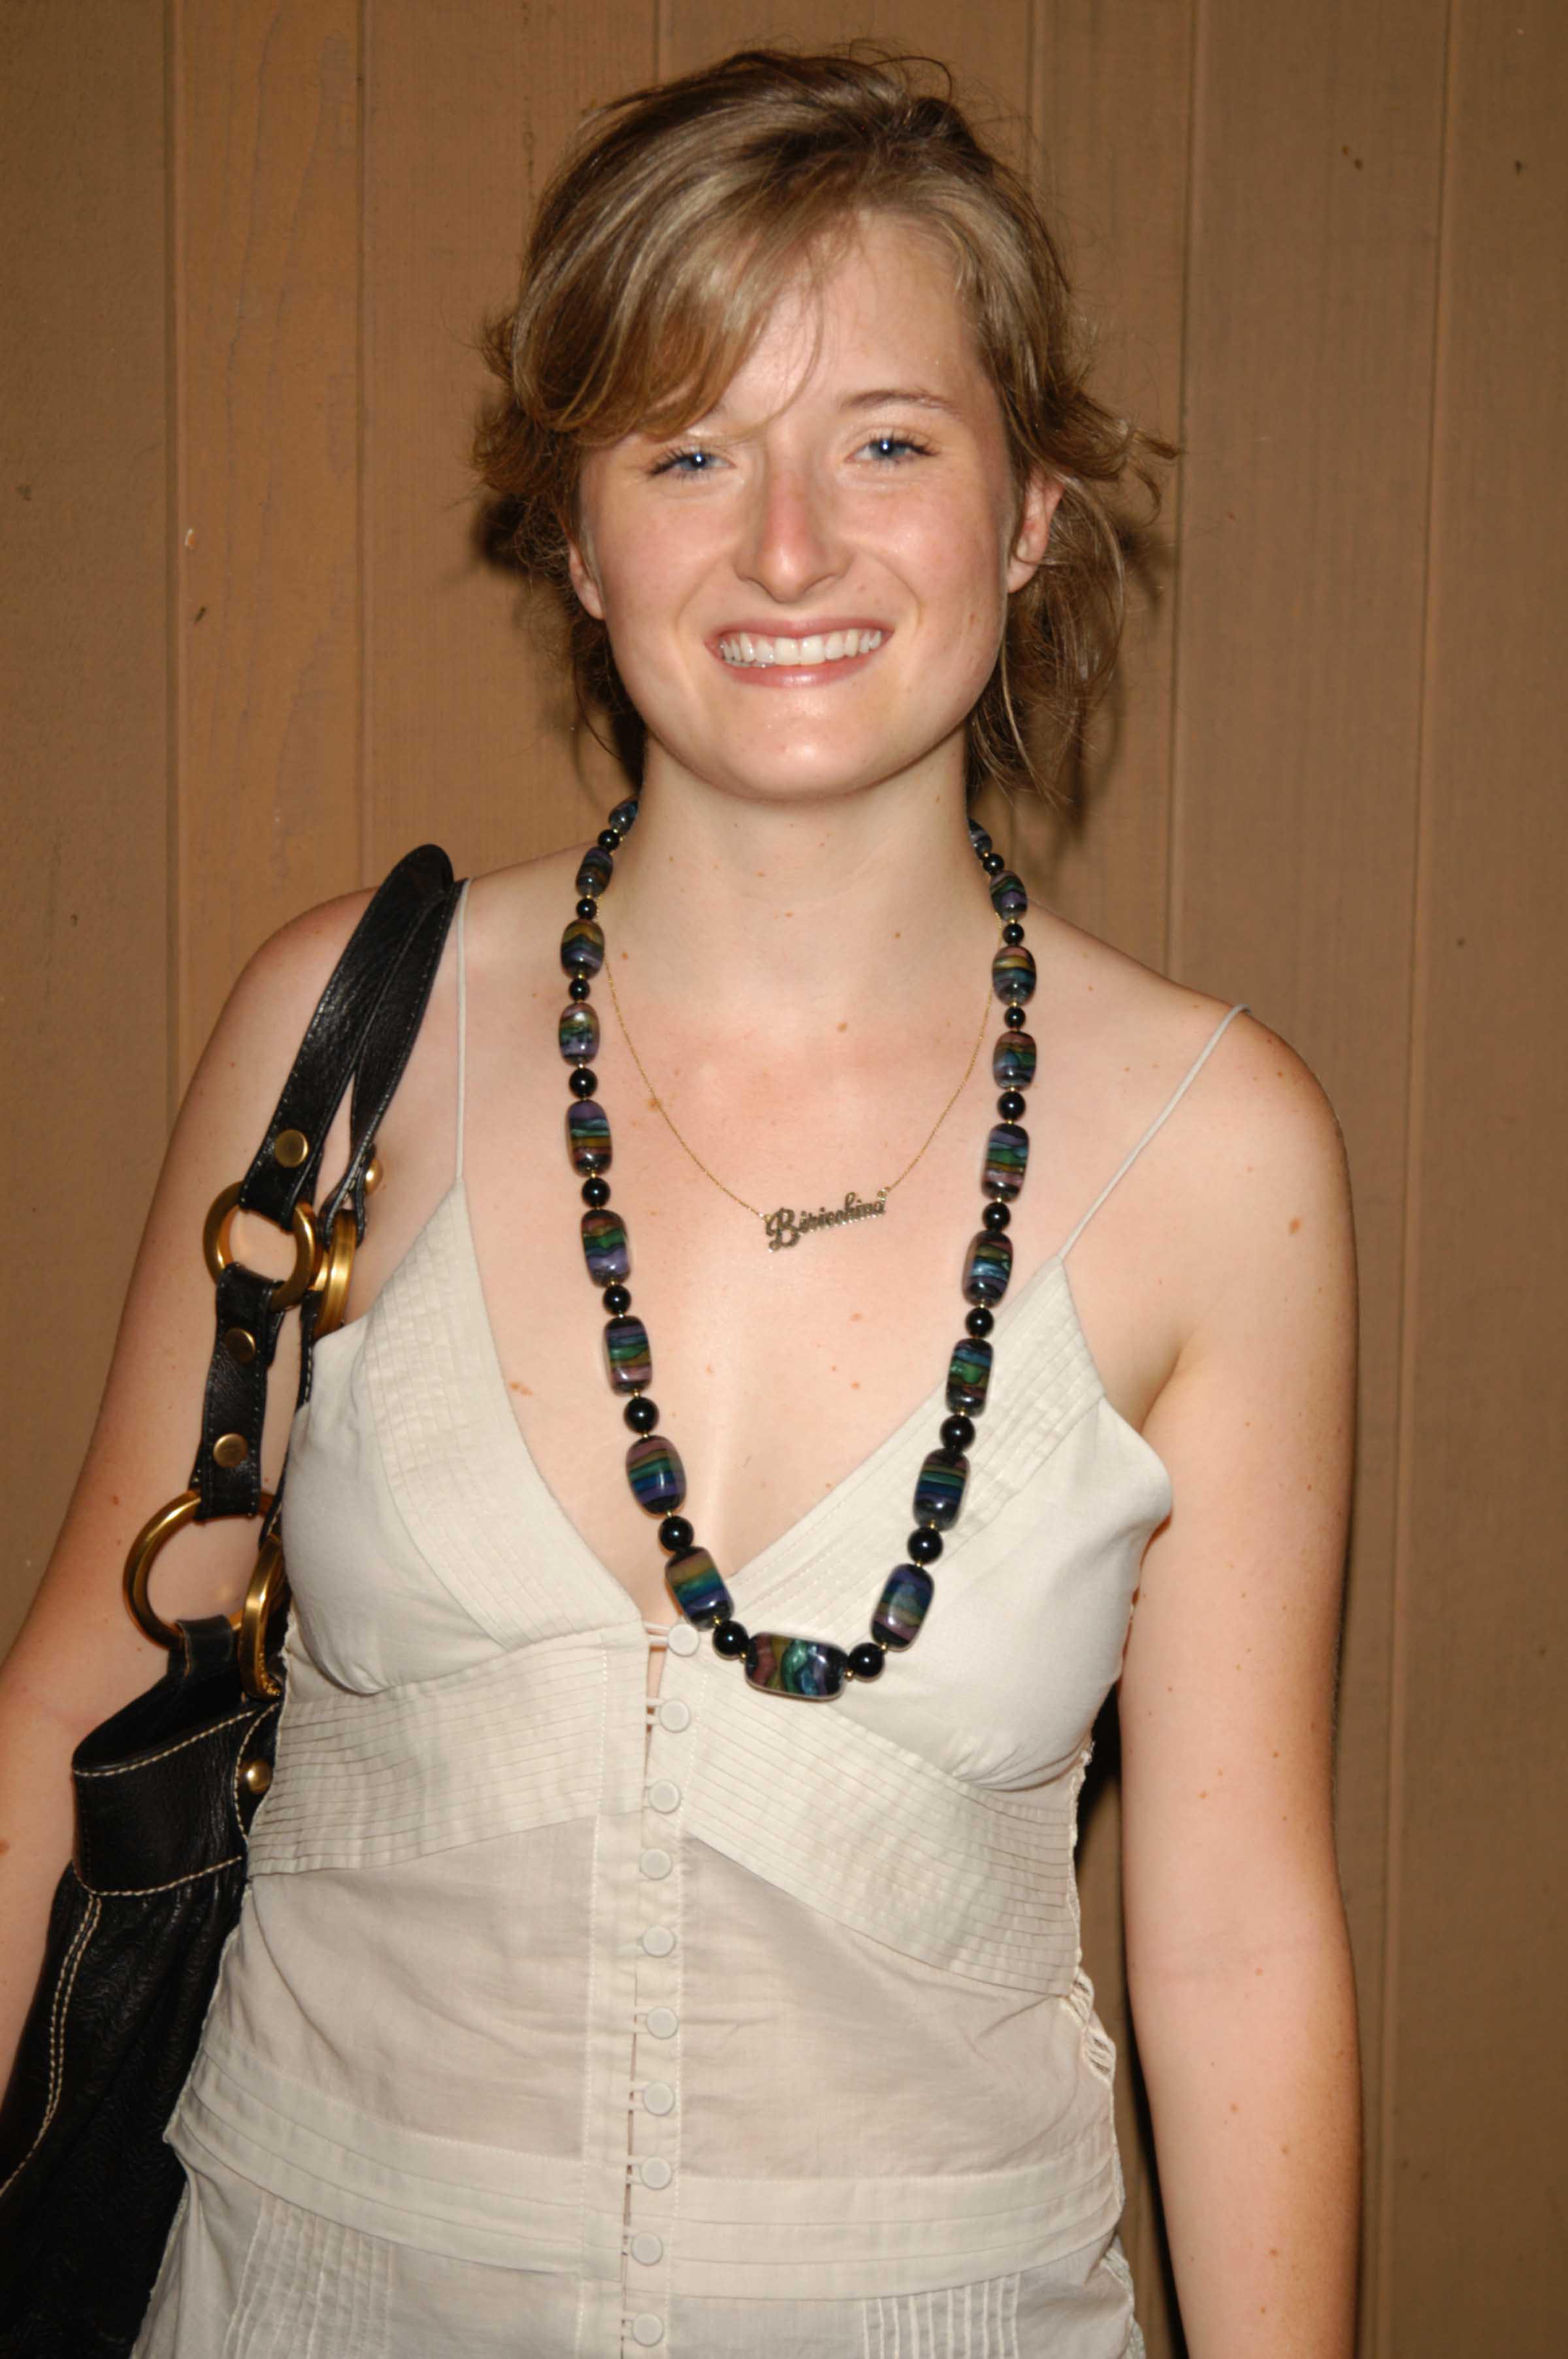 Grace Gummer attends The Public Theater's Summer Gala on June 28, 2006 in New York City | Source: Getty Images